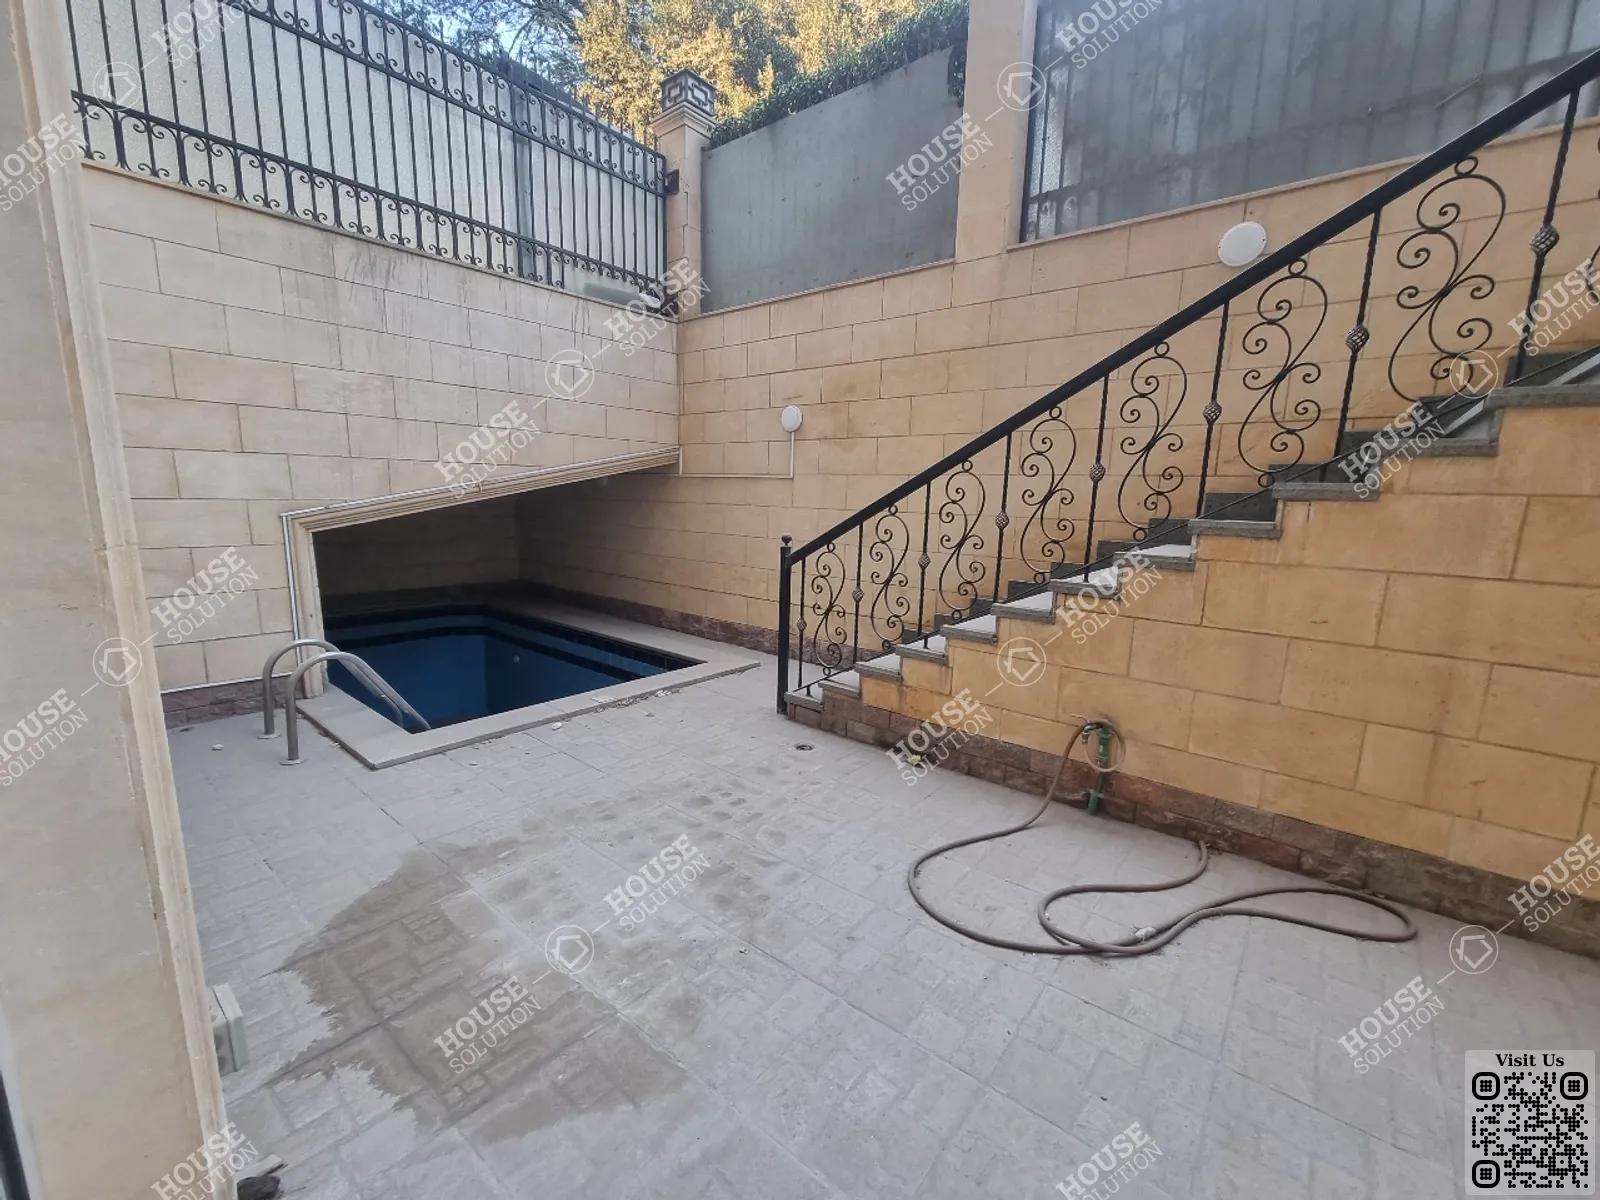 PRIVATE SWIMMING POOL  @ Ground Floors For Rent In Maadi Maadi Sarayat Area: 290 m² consists of 3 Bedrooms 3 Bathrooms Modern furnished 5 stars #5784-1